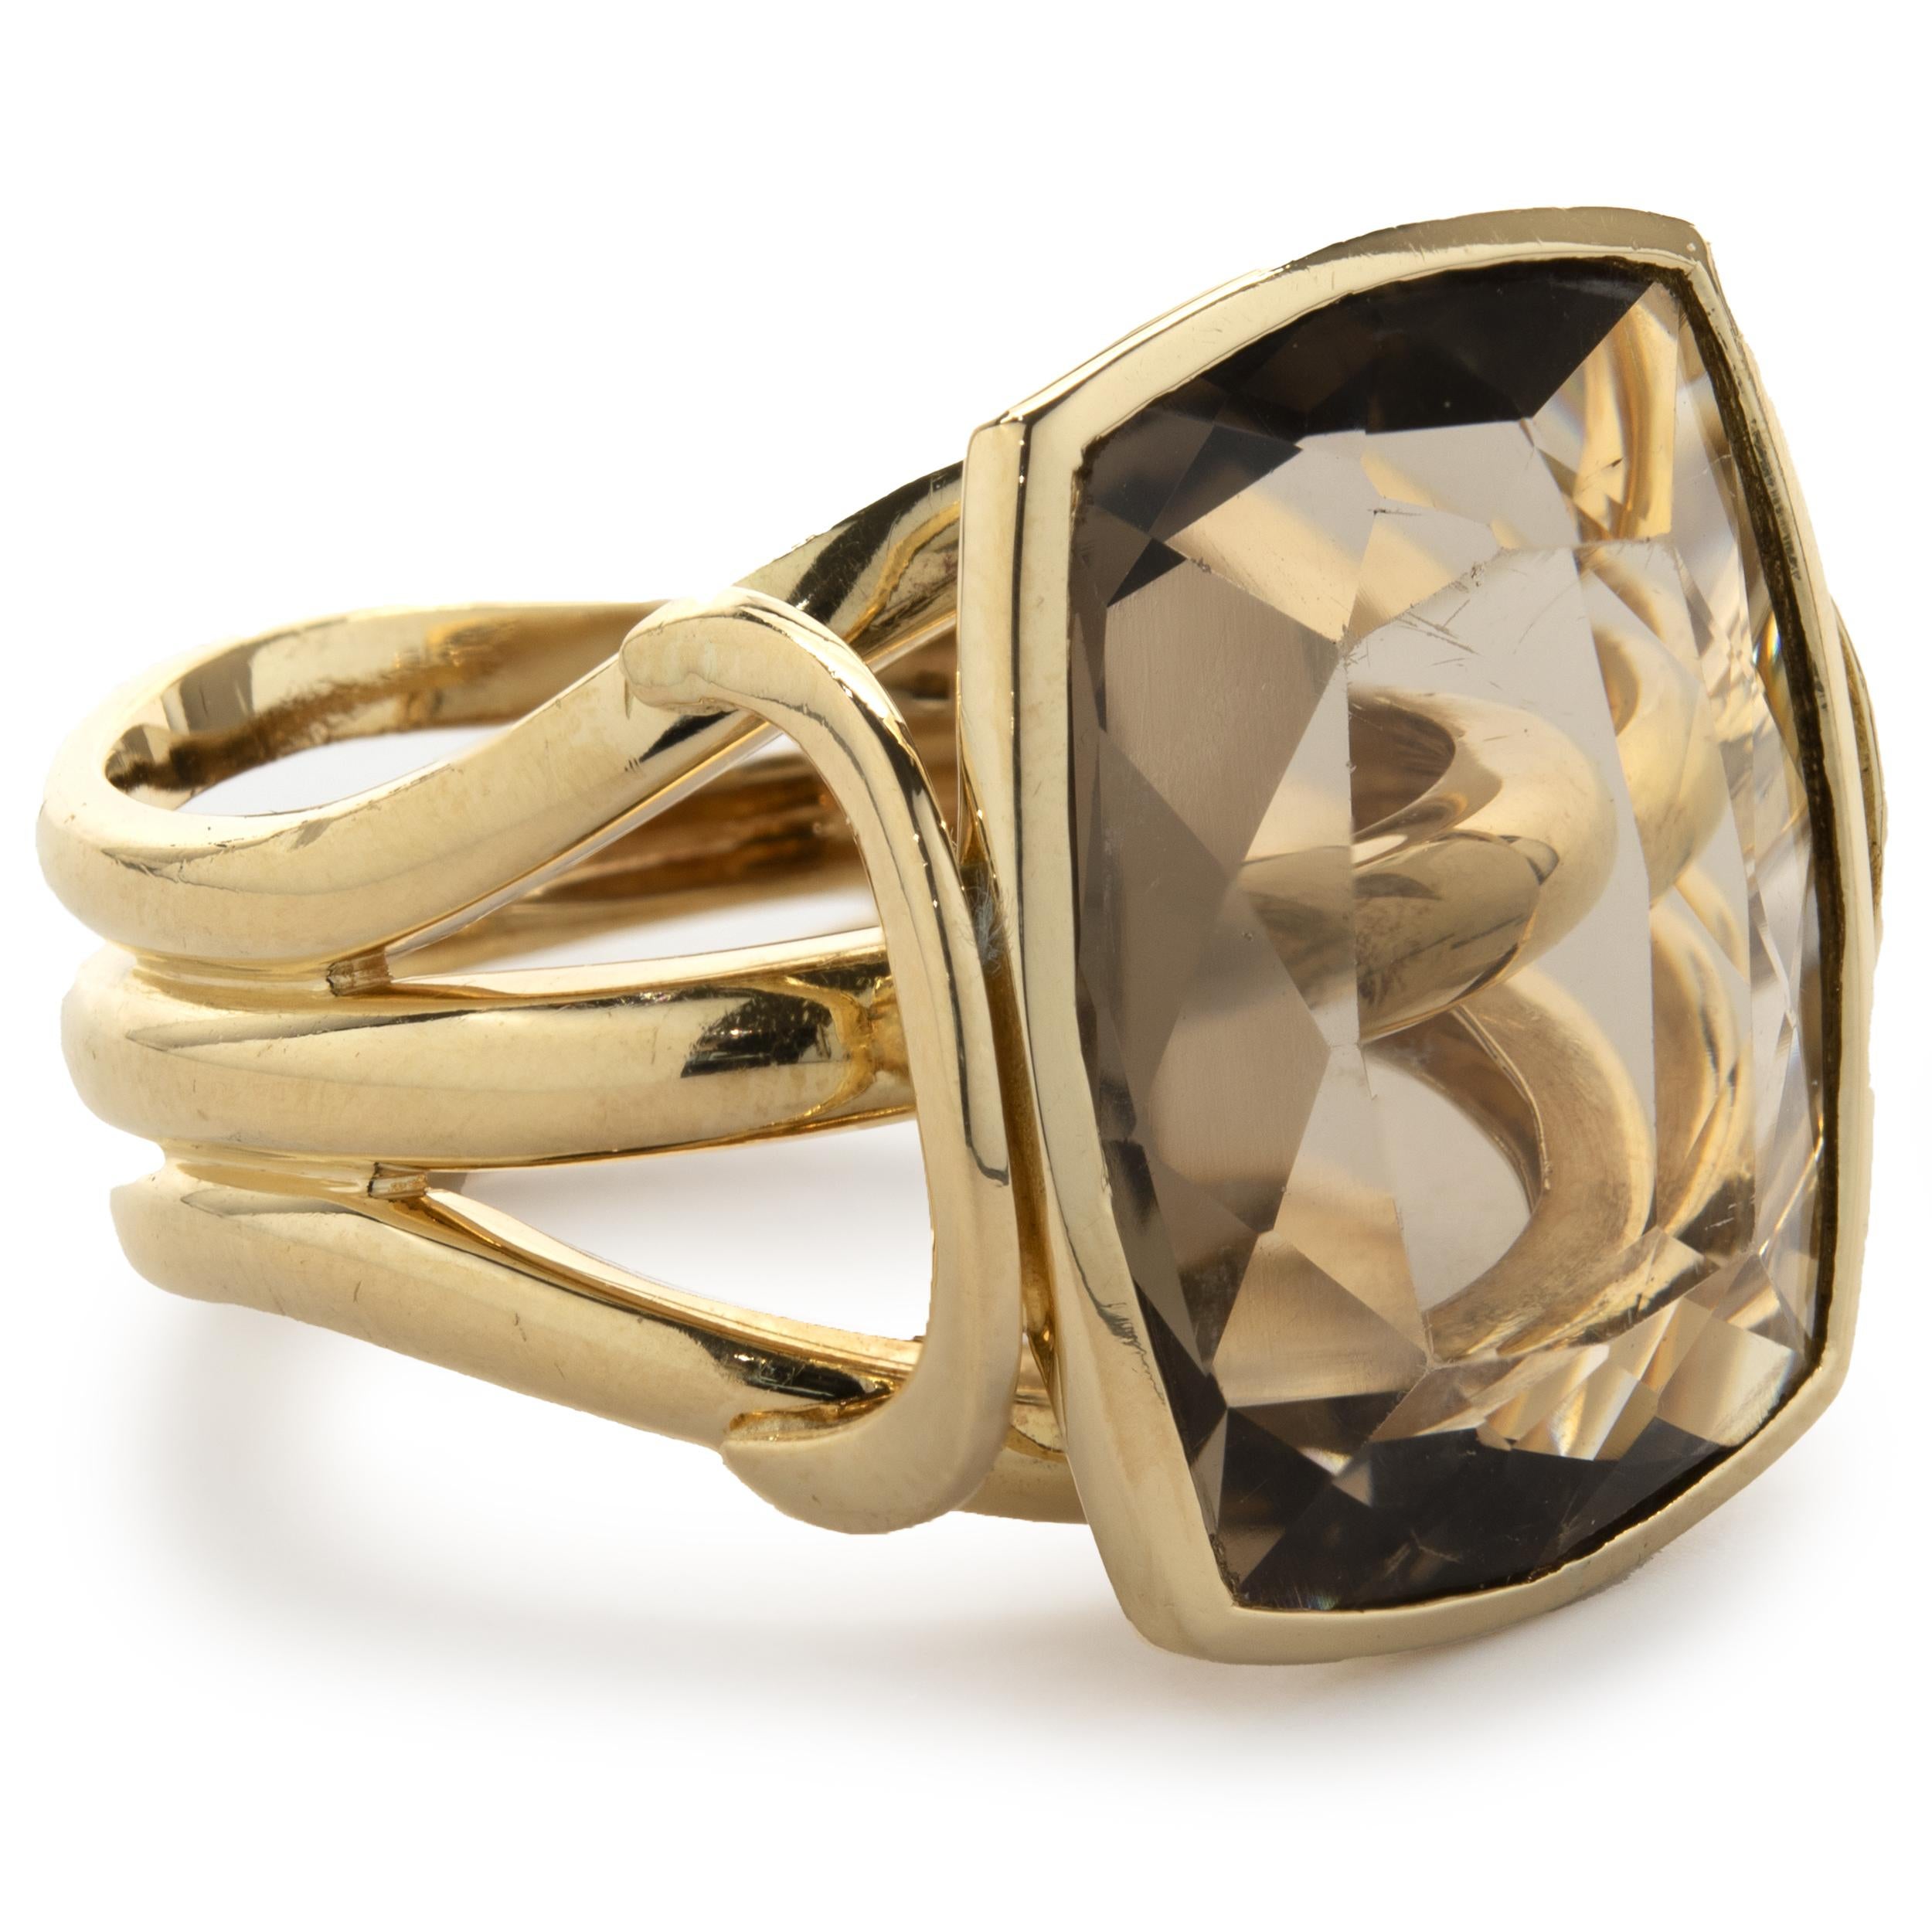 Designer: custom
Material: 18K yellow gold
Dimensions: ring top measures 21.45mm
Ring Size: 8.5 (complimentary sizing available)
Weight: 13.81 grams
